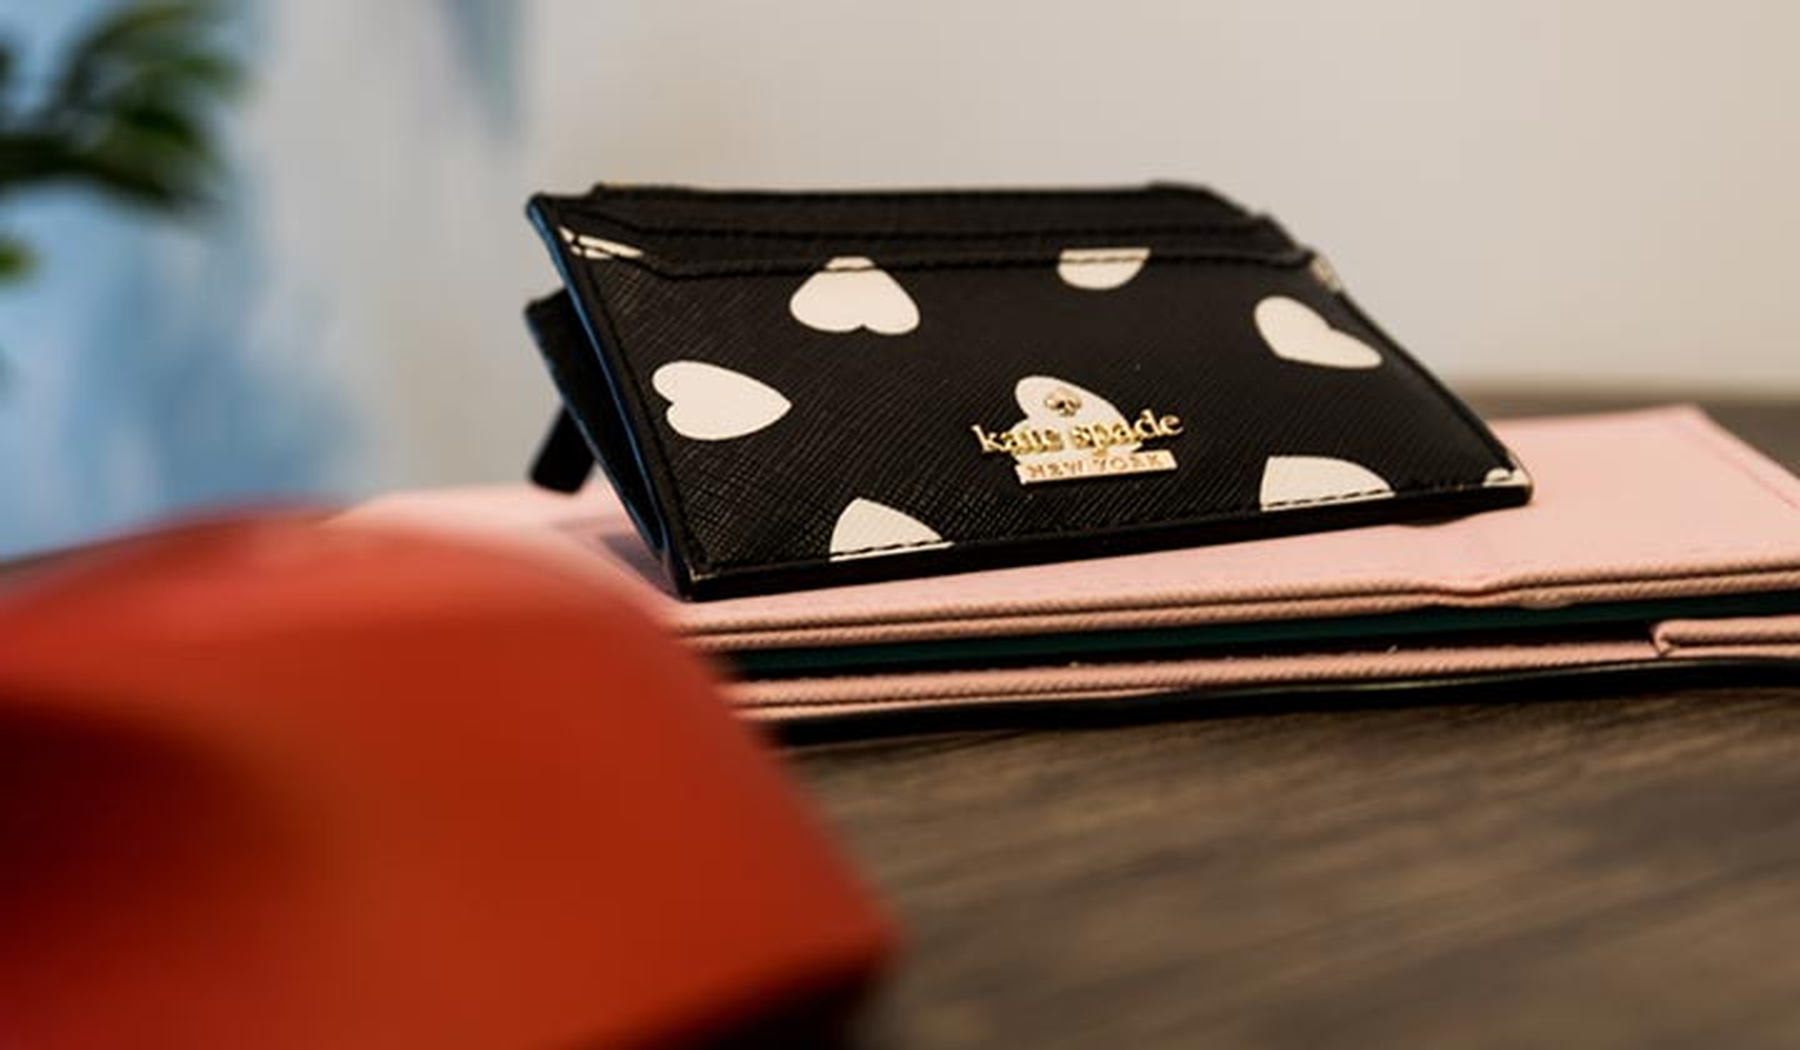 Kate Spade wallet in black leather with white hearts